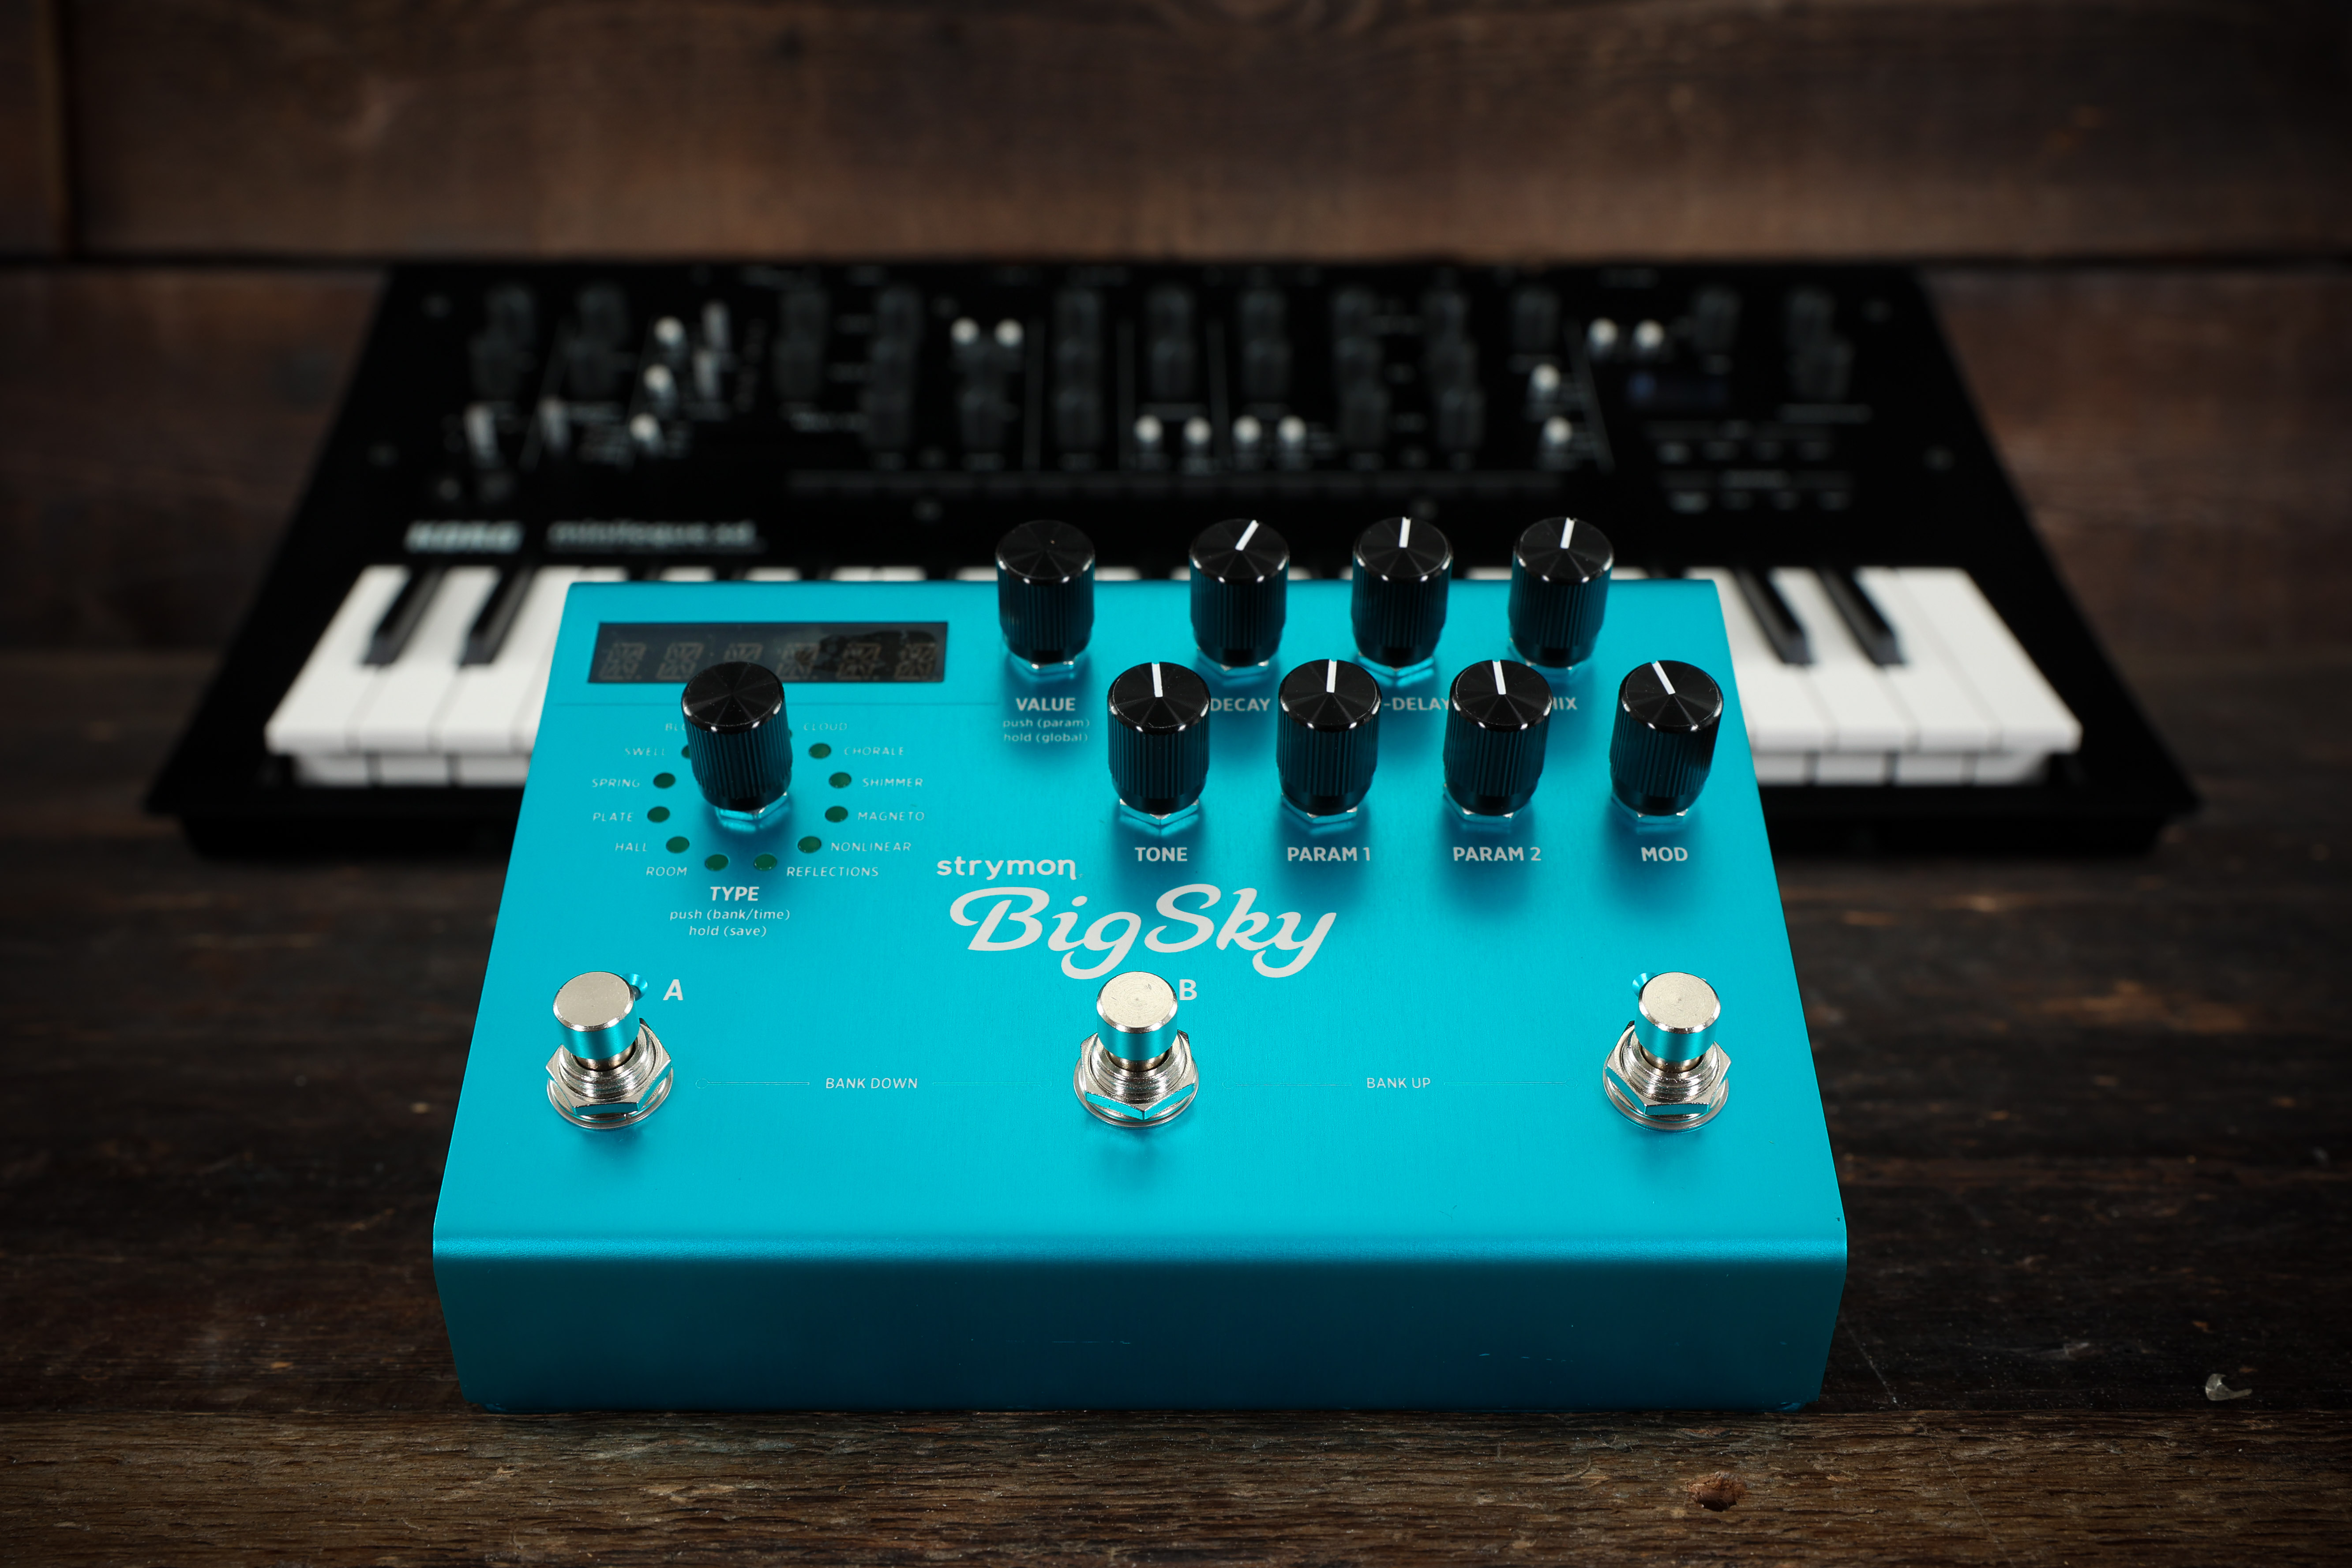 Incubus programma Uitsluiting The Best 5 Guitar Effects Pedals for Synths (2022) - Andertons Blog